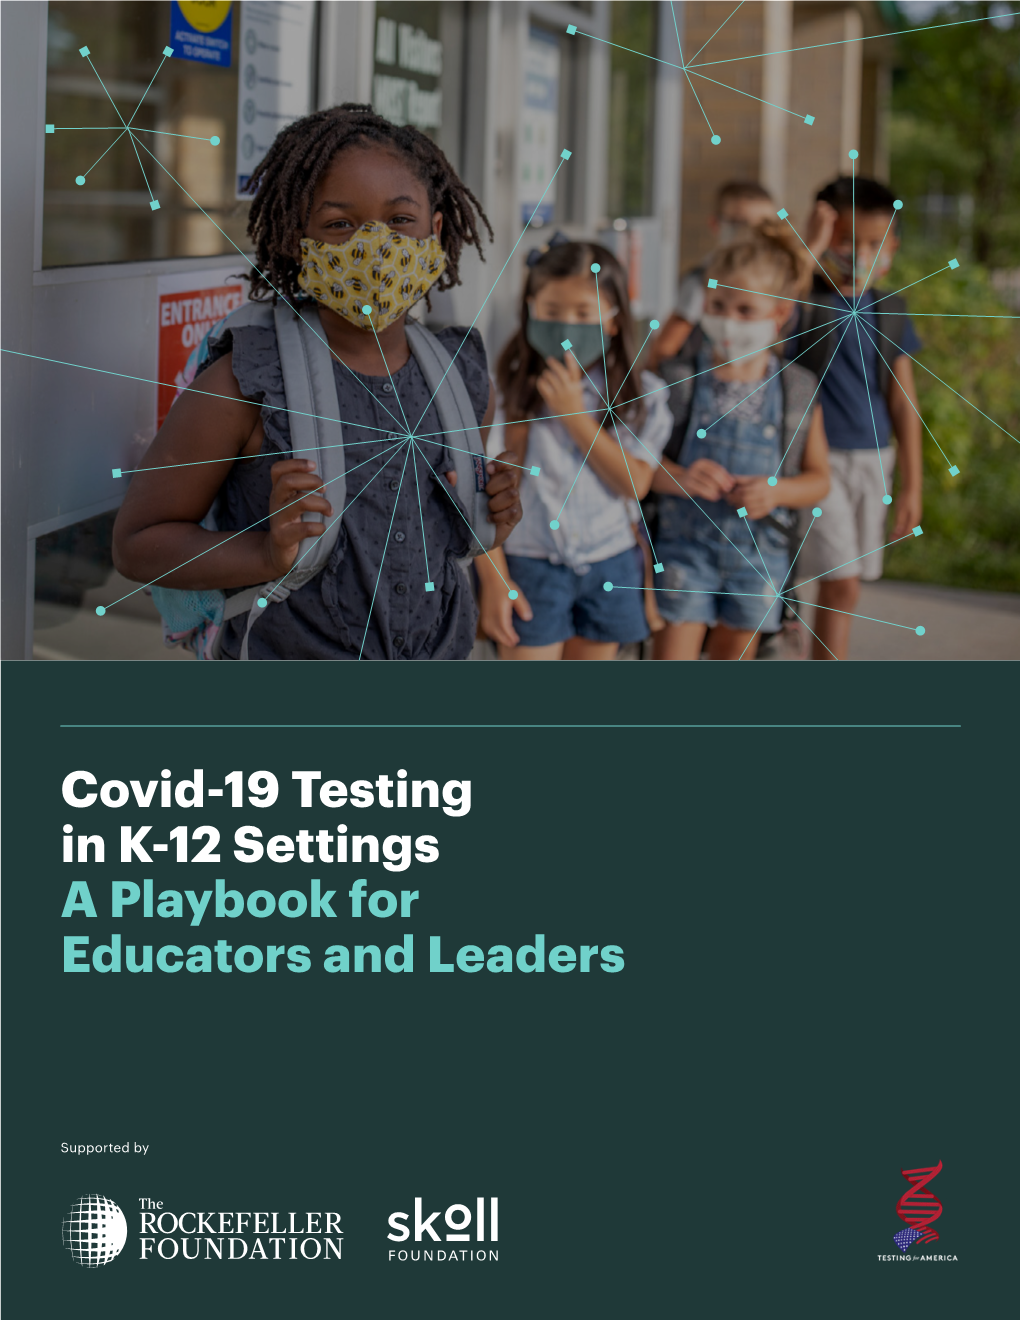 Covid-19 Testing in K-12 Settings a Playbook for Educators and Leaders